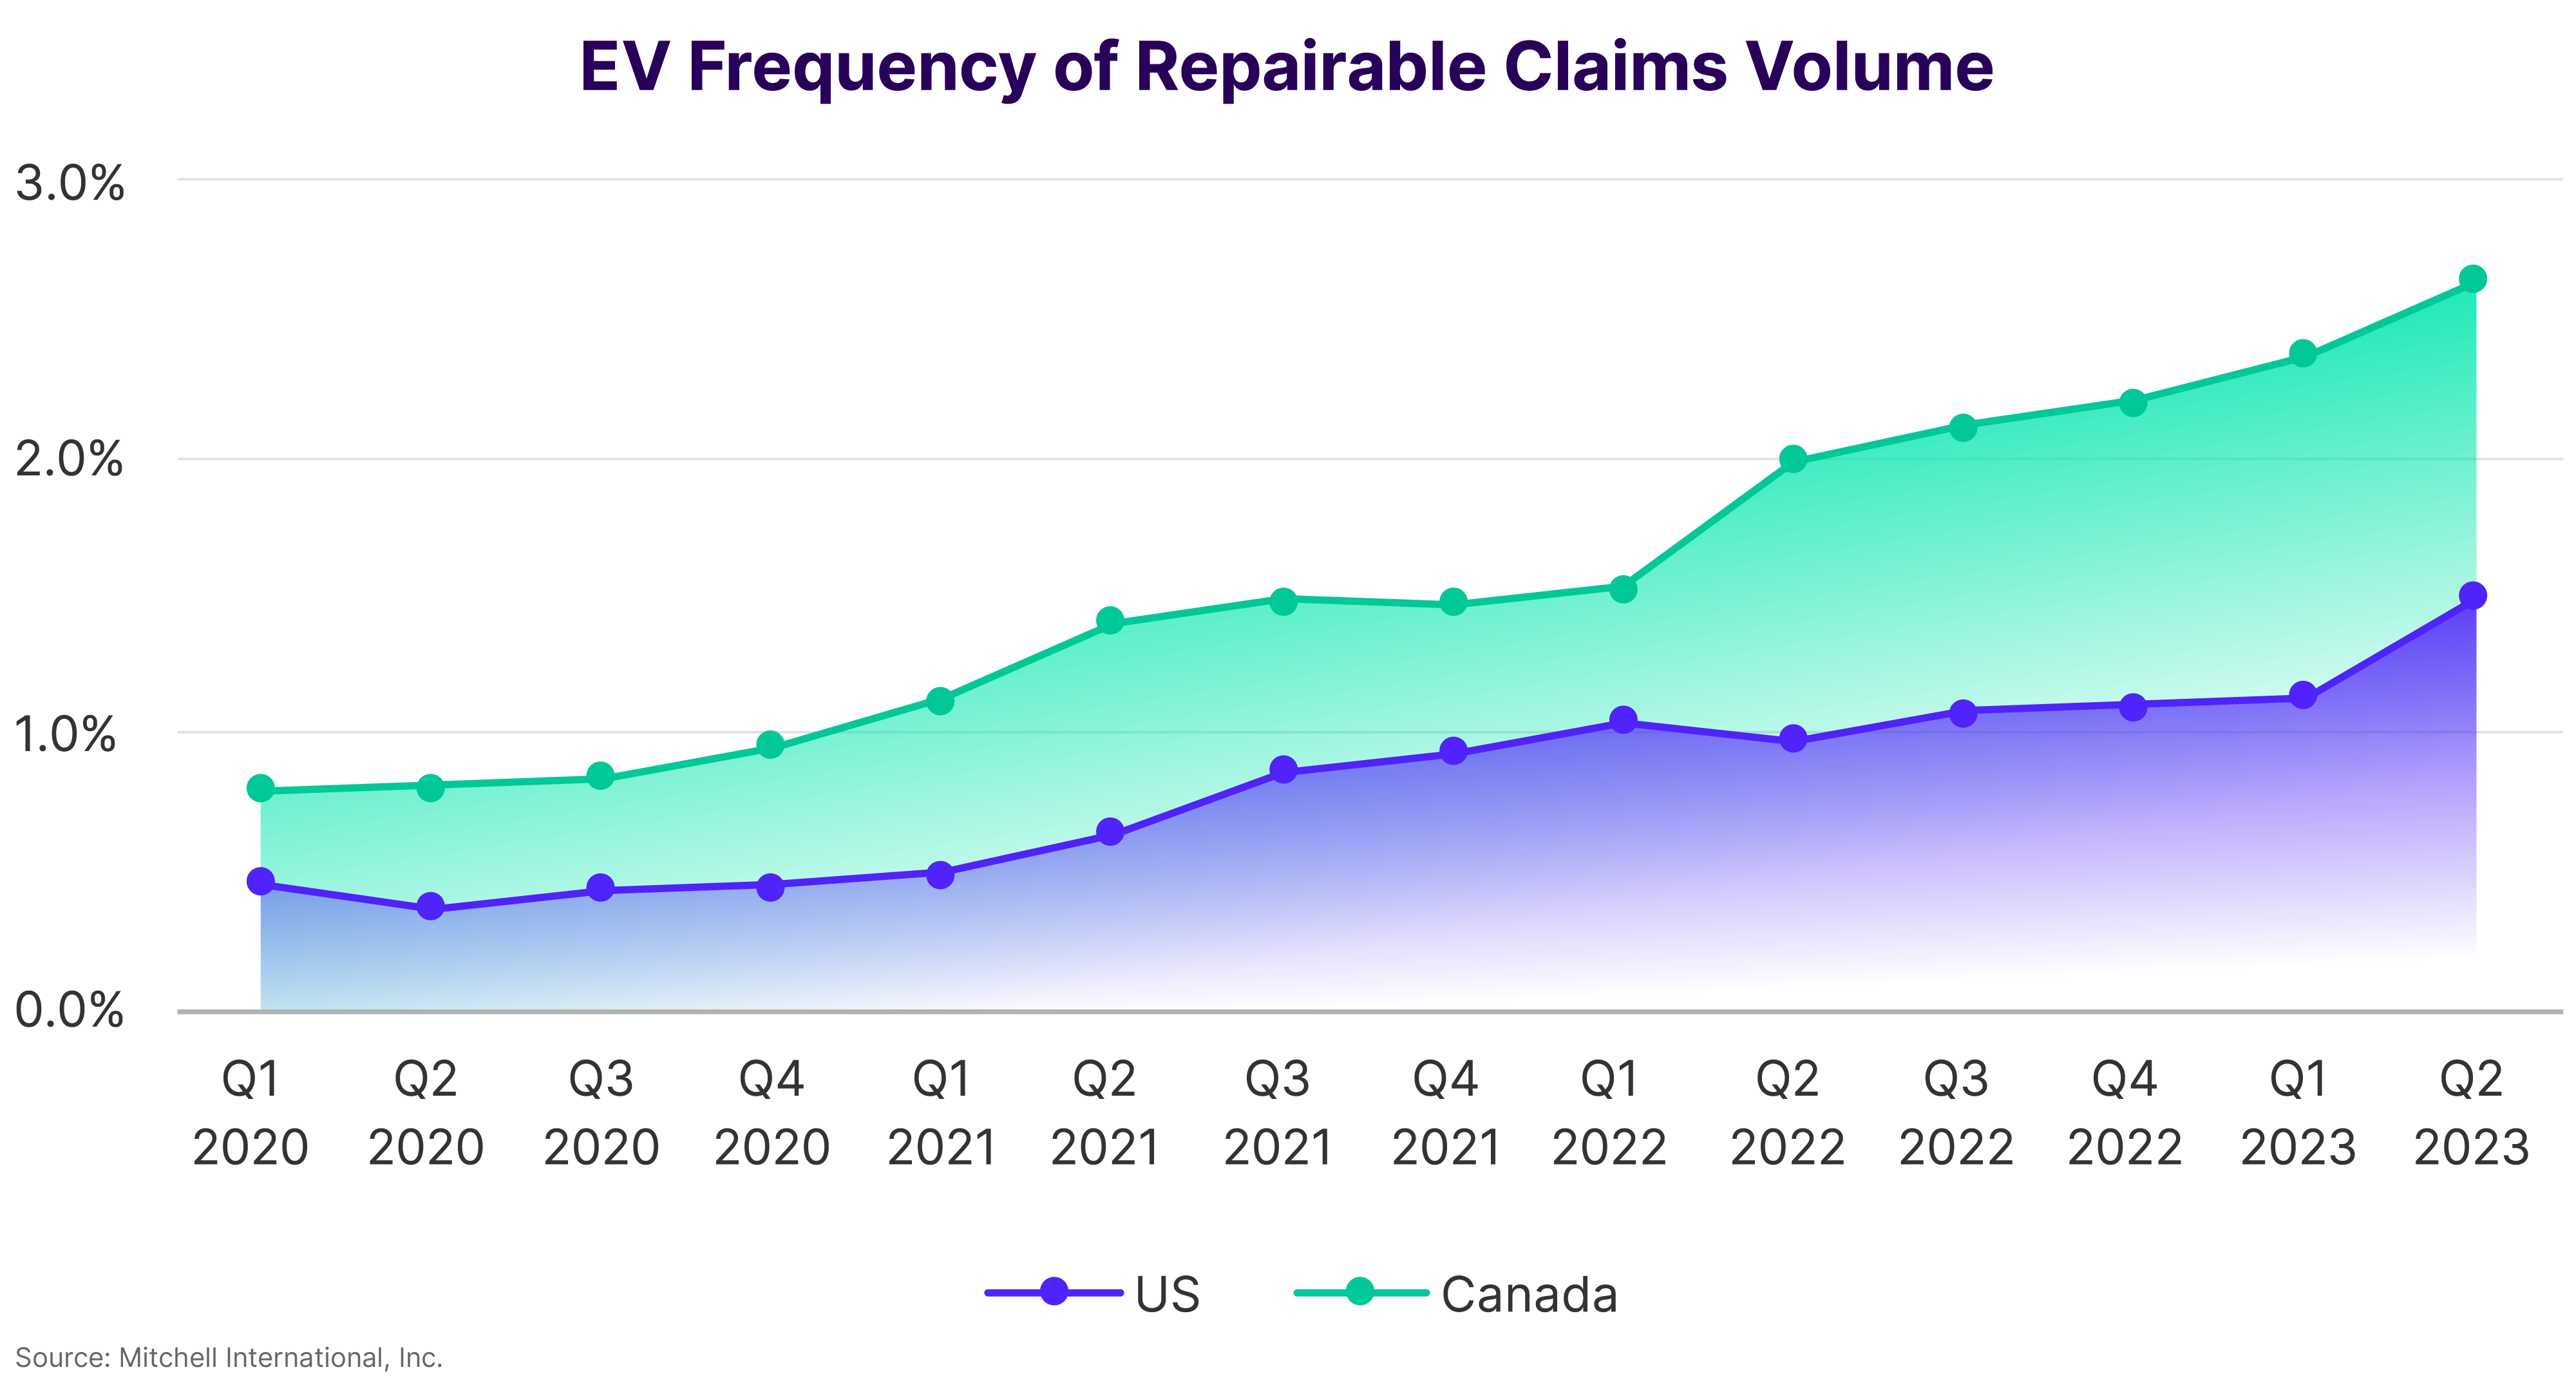 EV Frequency of Repairable Claims Volume Q2 2023